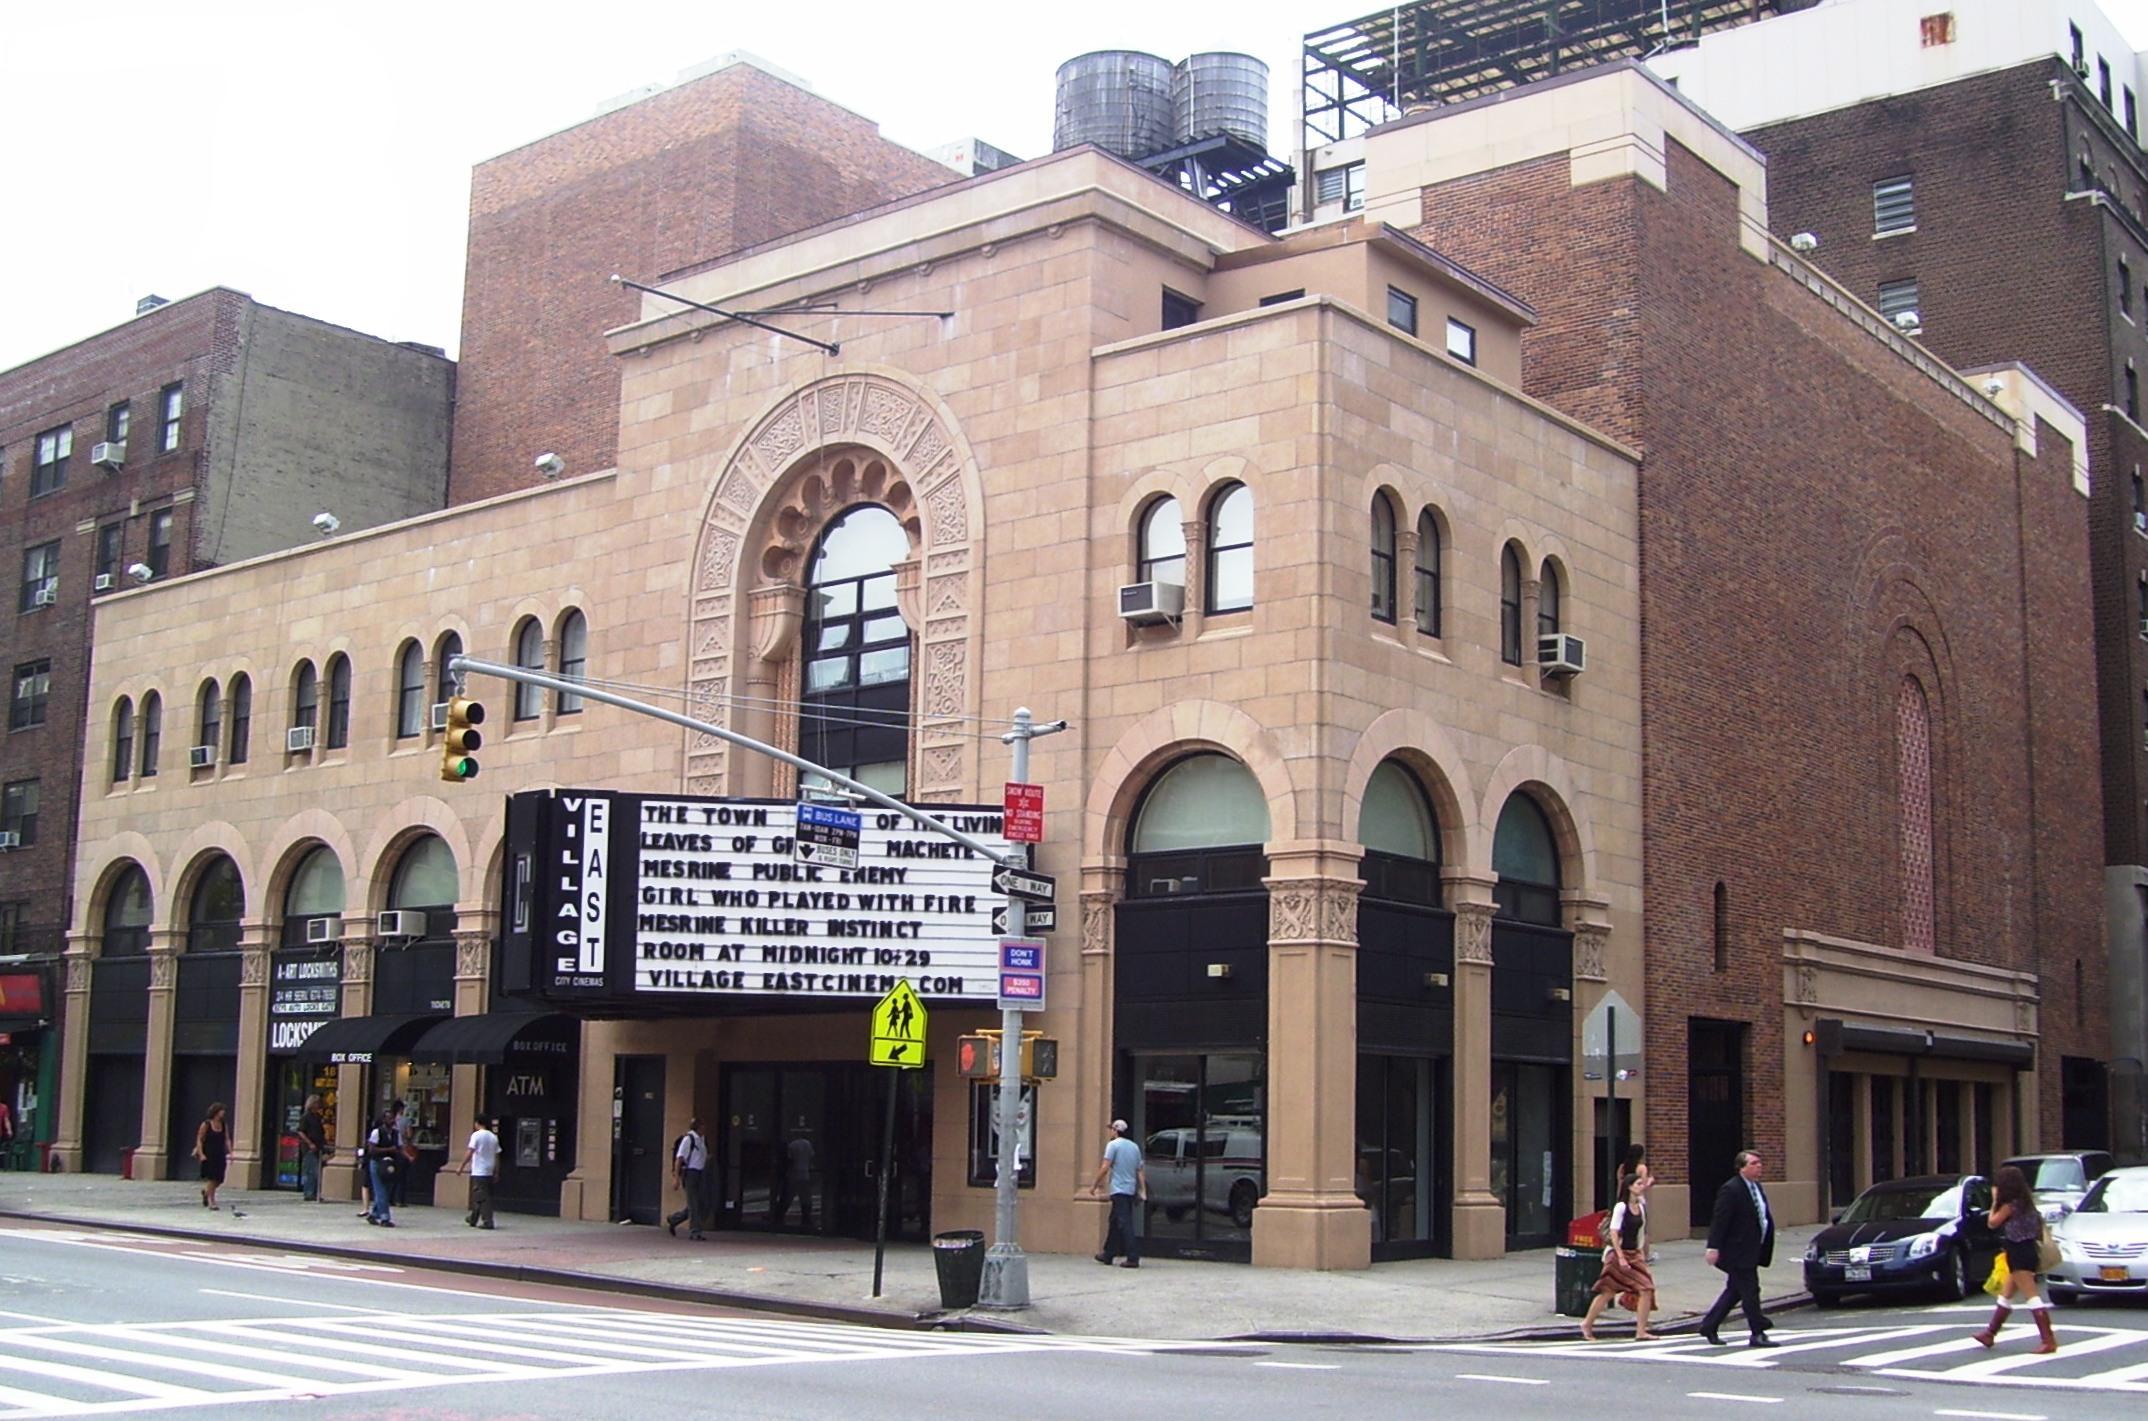 In 1926, developer Louis N. Jaffe had the Yiddish Art Theatre built for actor Maurice Schwartz, "Mr. Second Avenue". The area was known as the "Jewish Rialto" at the time. After four seasons it became the Yiddish Folks Theatre, then a movie theatre, the home of the APA-Phoenix Theatre, the Entermedia Theatre, and now a movie theater again. It was designated a New York City landmark in 1993. (Photo: Wikipedia)